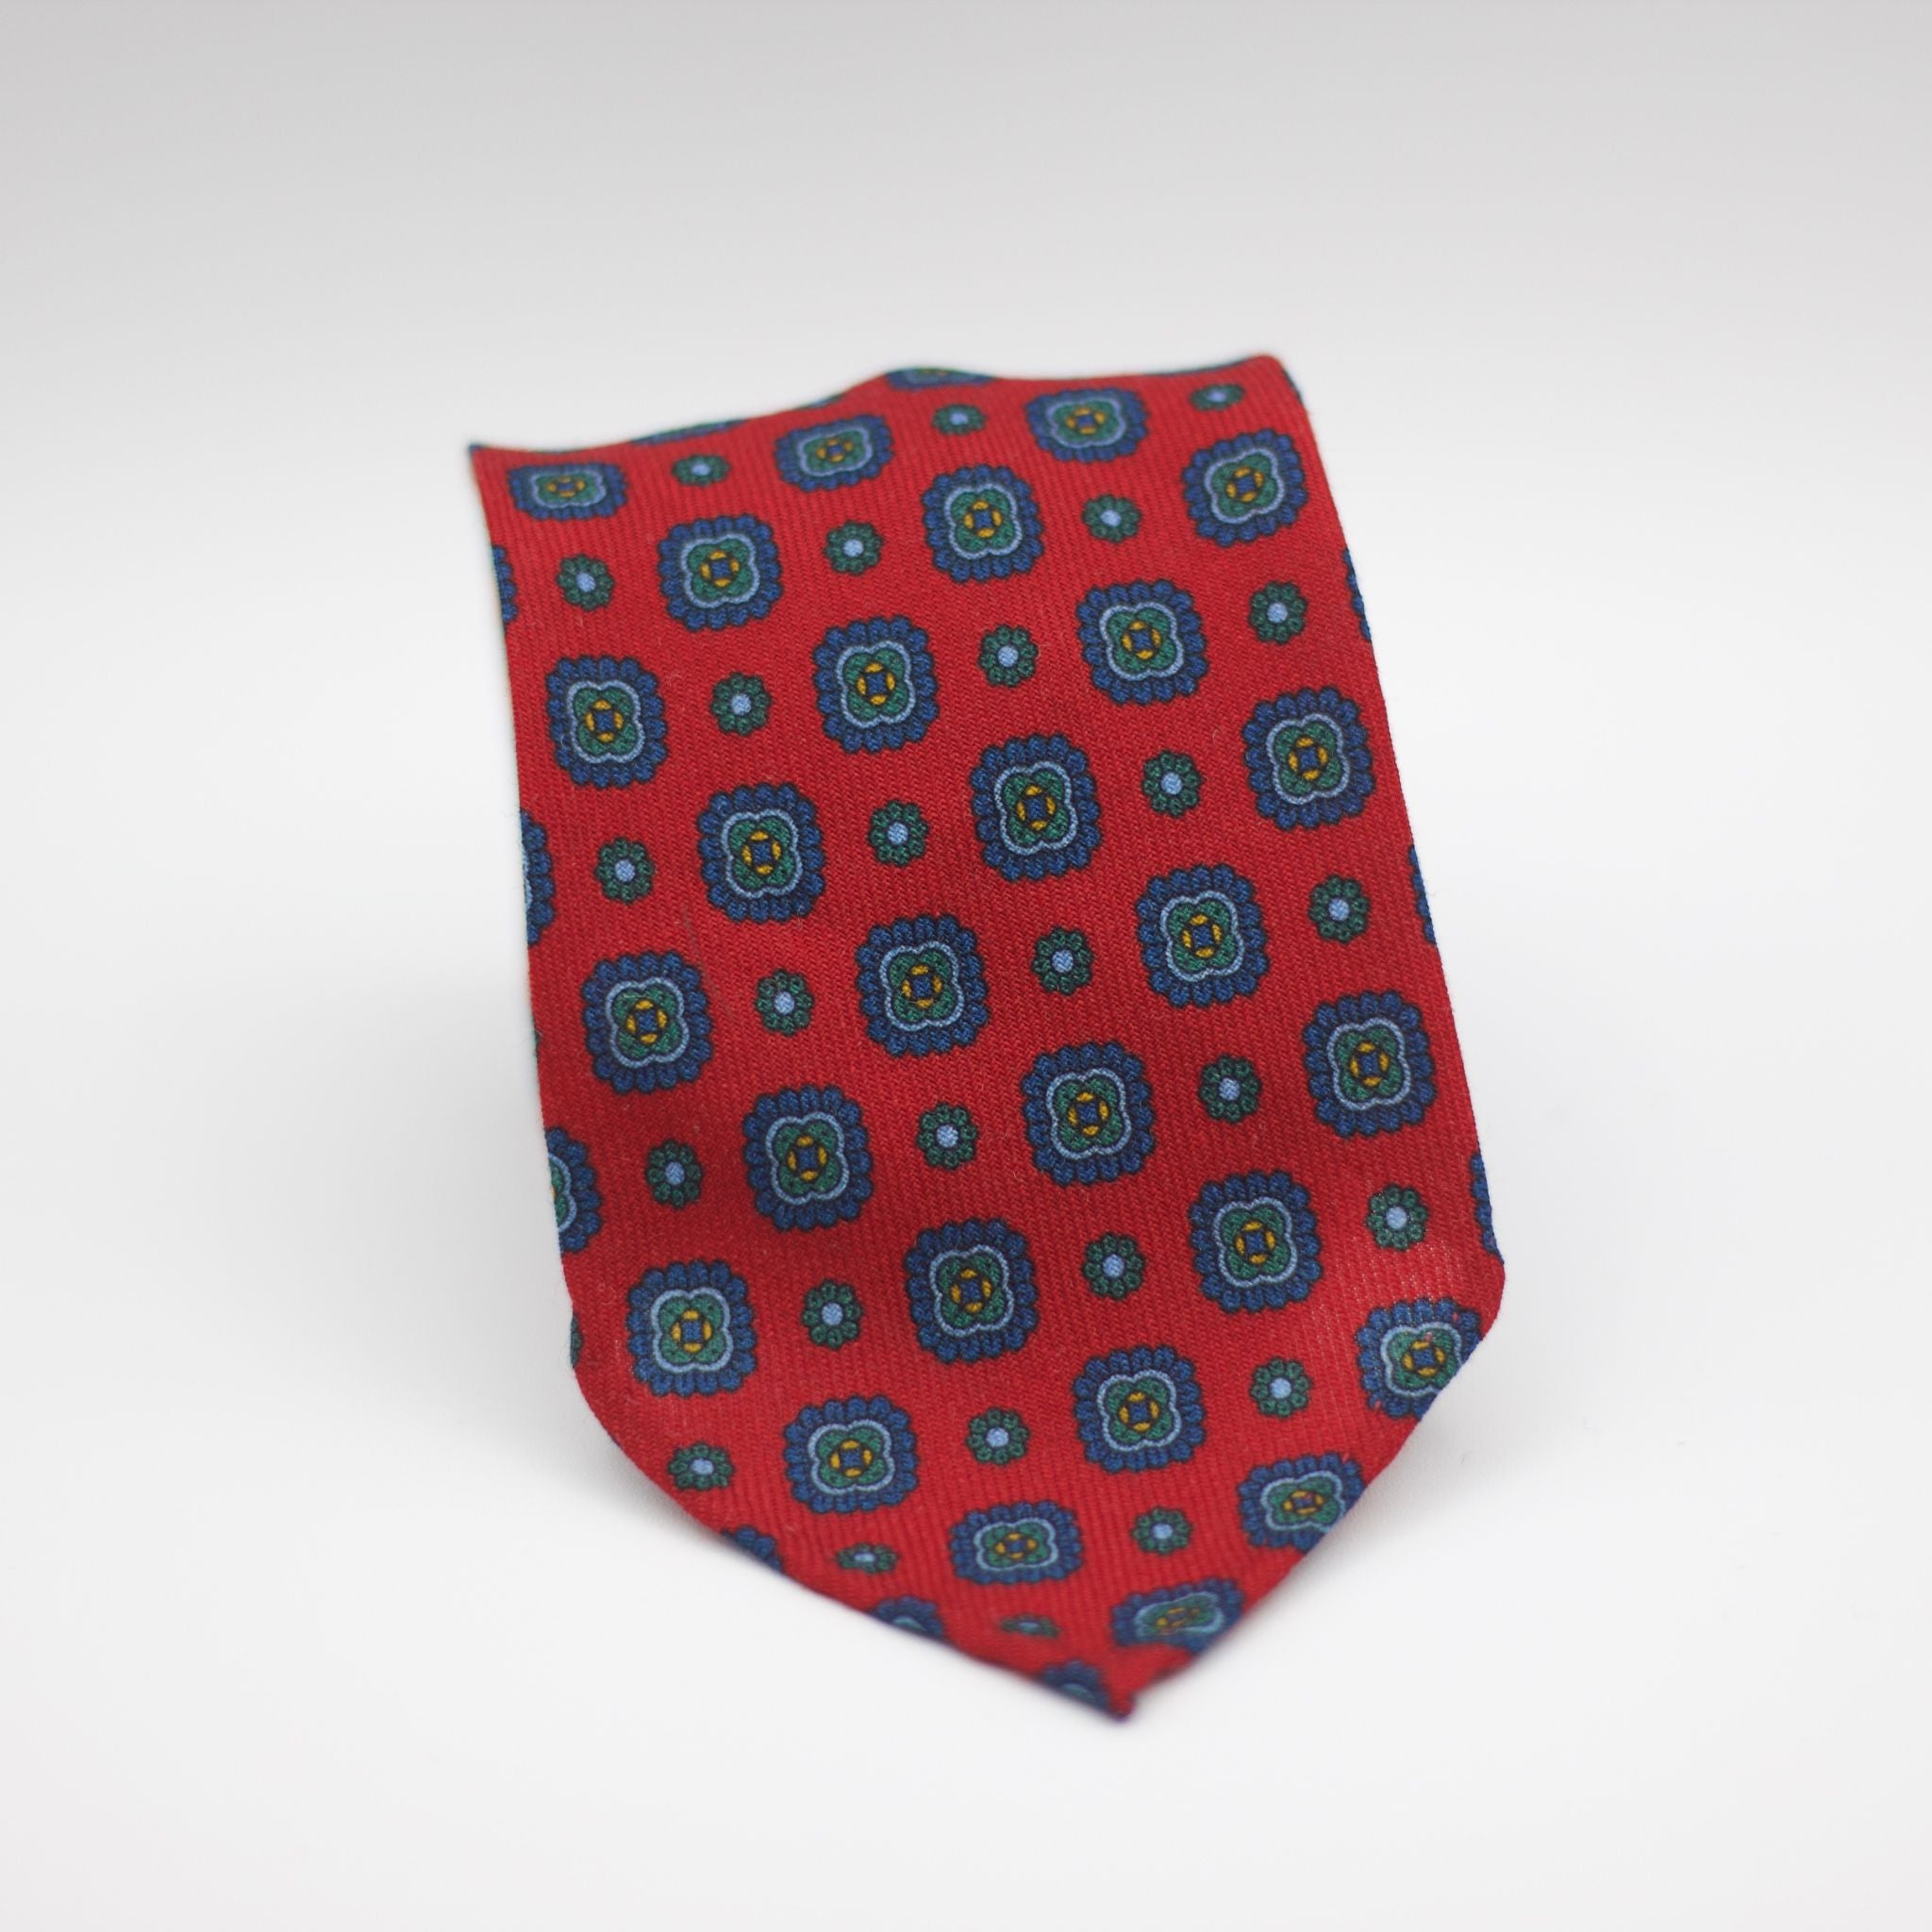 Cruciani & Bella 100%  Printed Wool  Unlined Hand rolled blades Red, Green, Blue and light Blue  Motif Tie Handmade in Italy 8 cm x 150 cm #7287